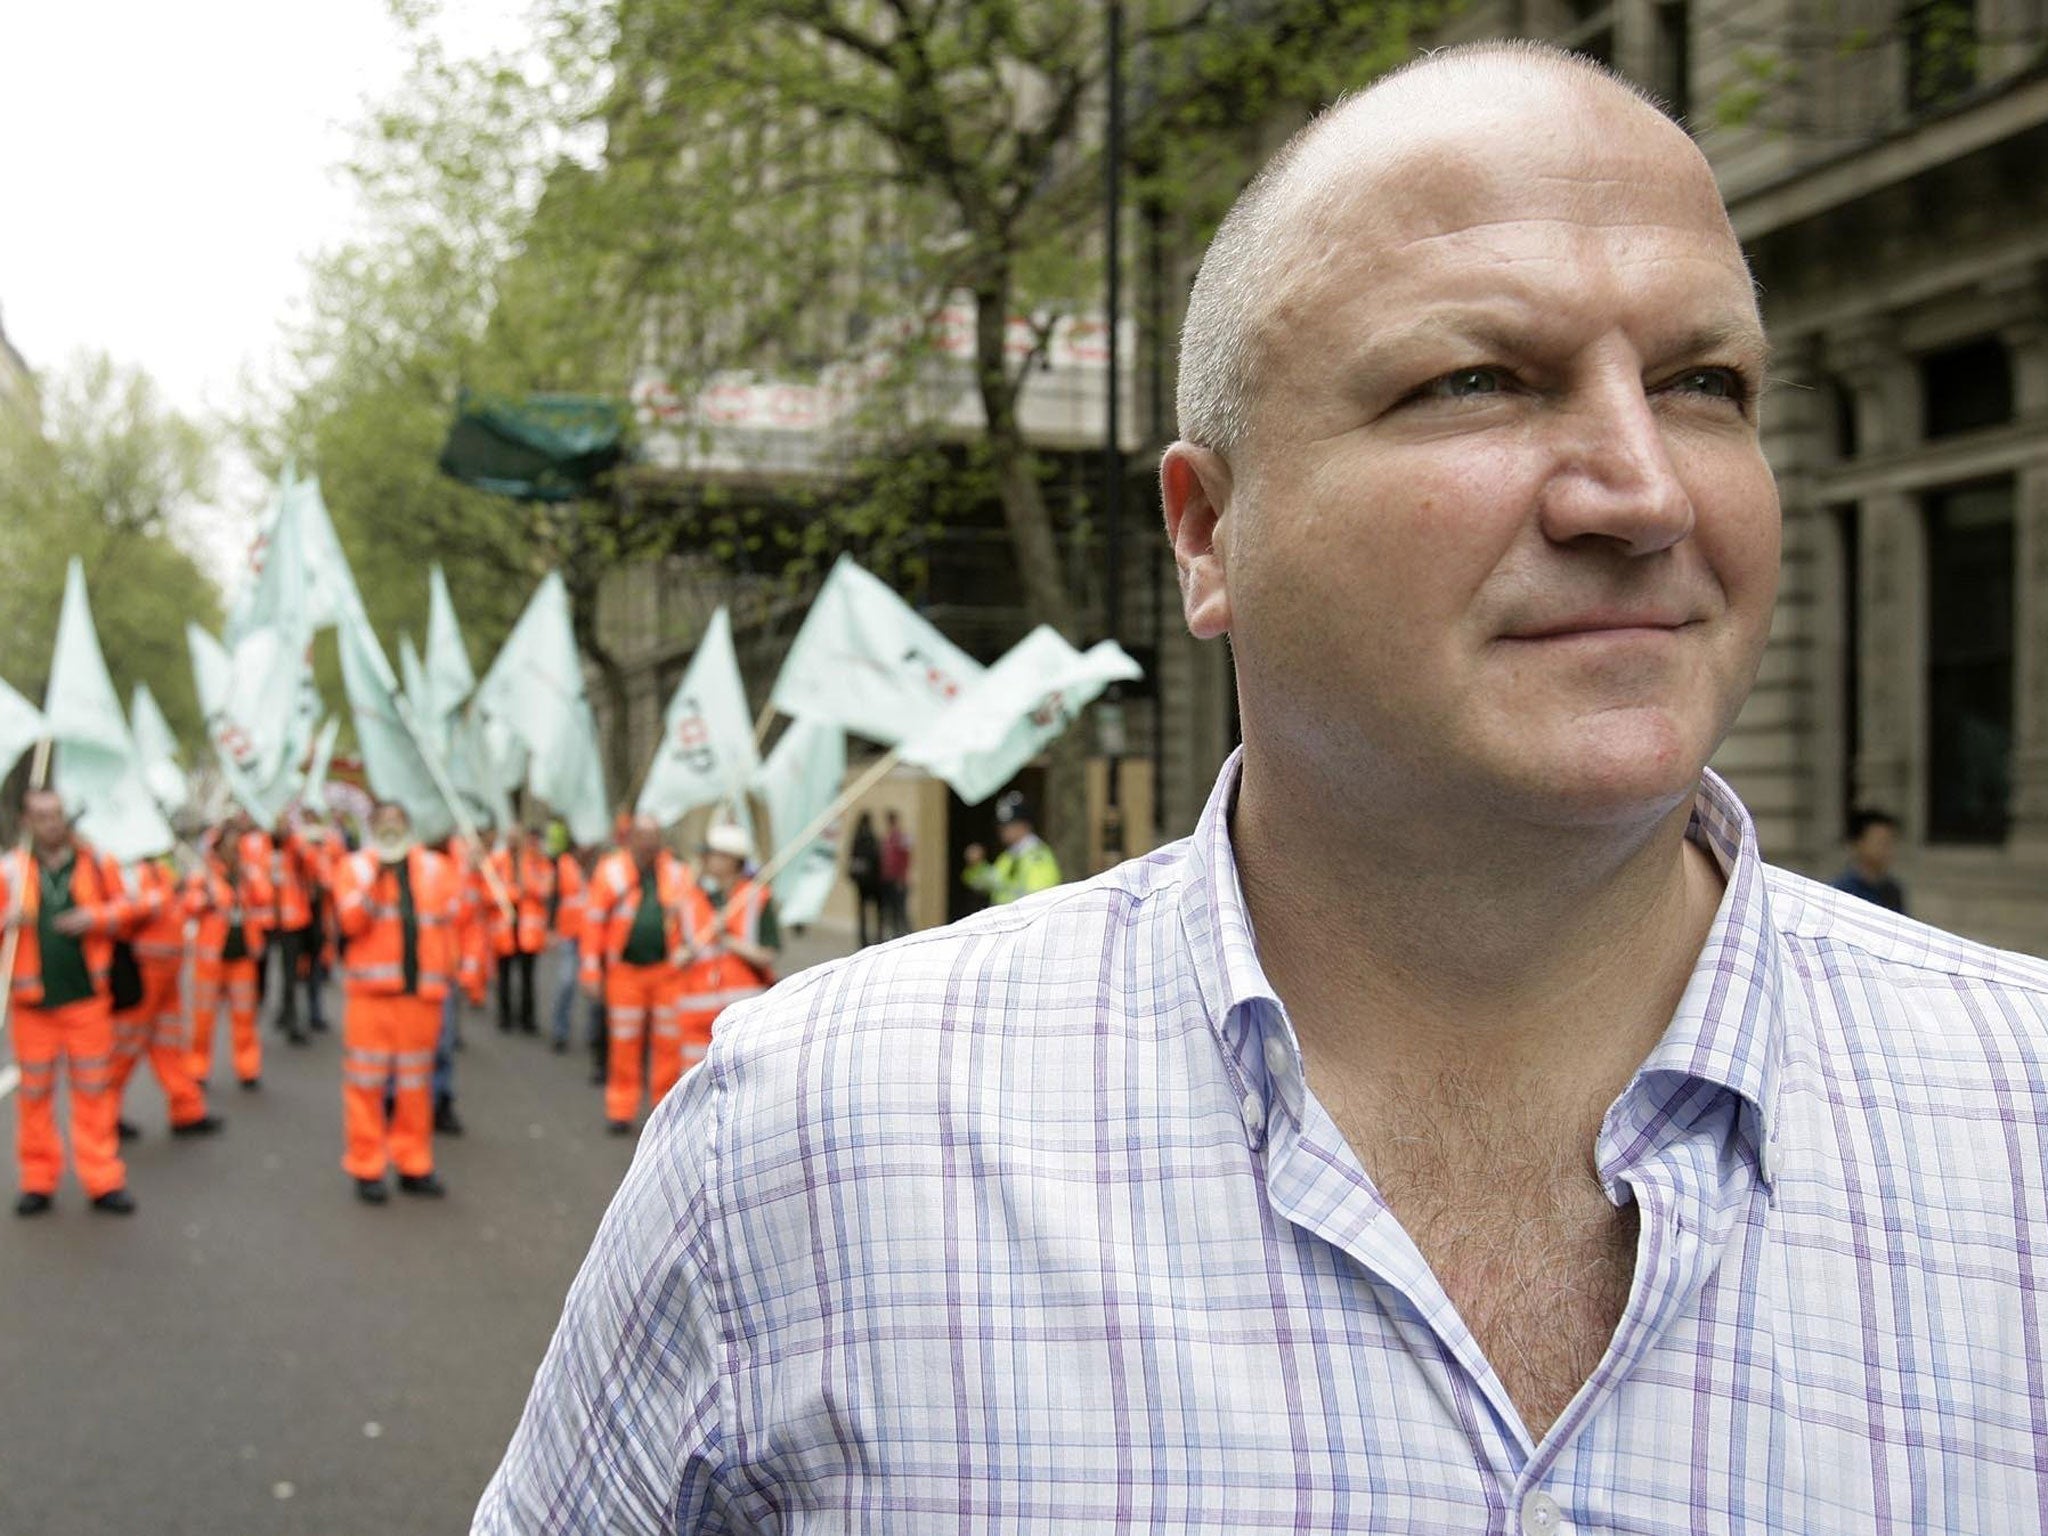 Bob Crow, the RMT General Secretary, died in 2014